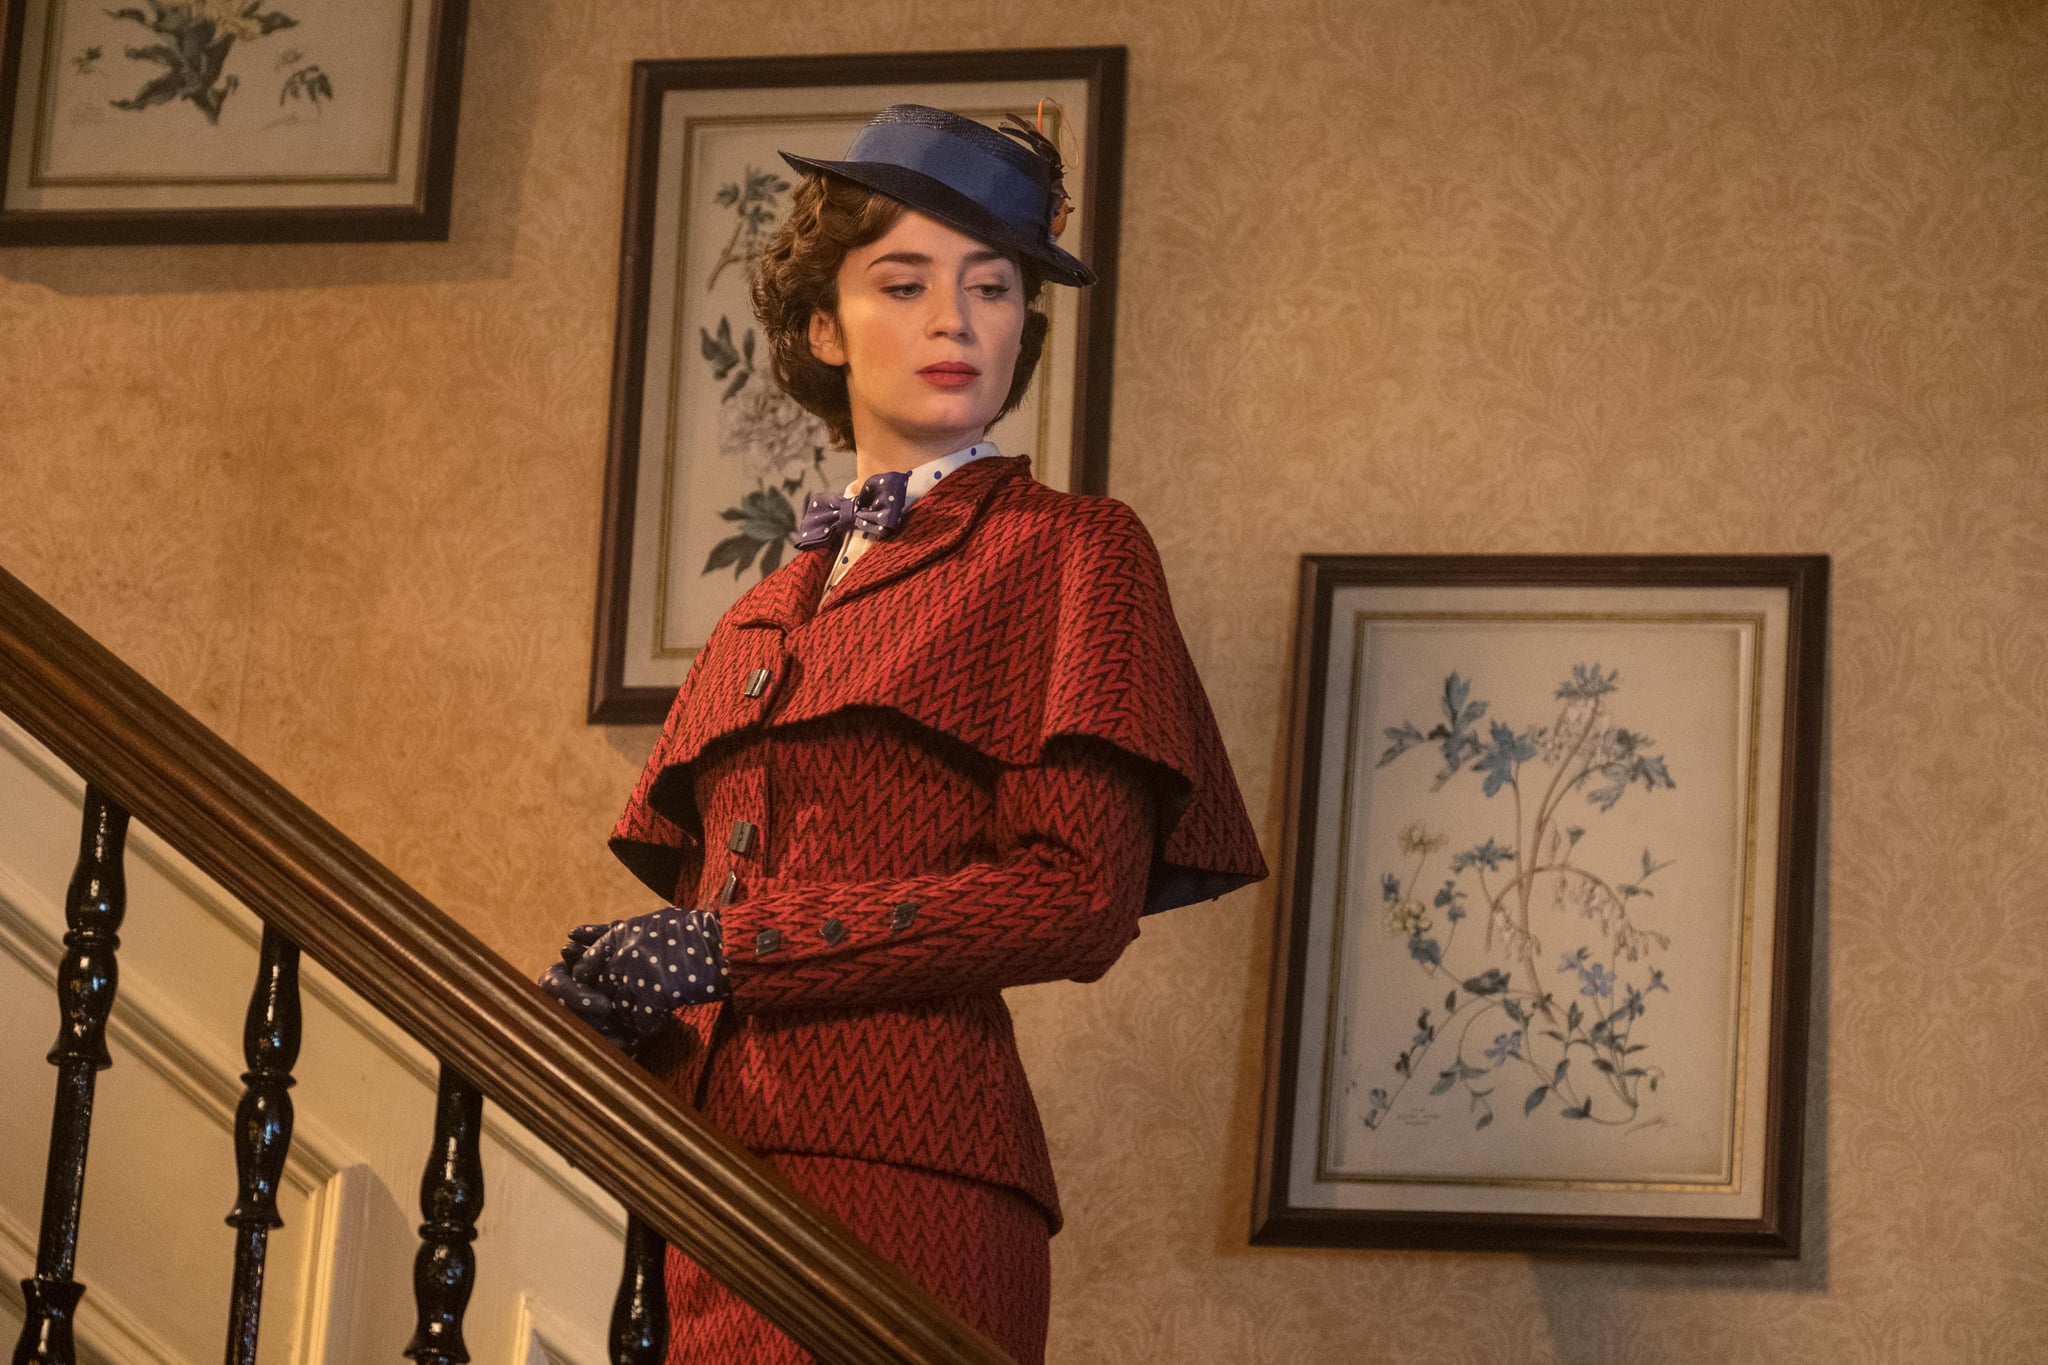 Emily Blunt is Mary Poppins in Disney's MARY POPPINS RETURNS,  a sequel to the 1964 film MARY POPPINS, which takes audiences on an all-new adventure with the practically perfect nanny and the Banks family.